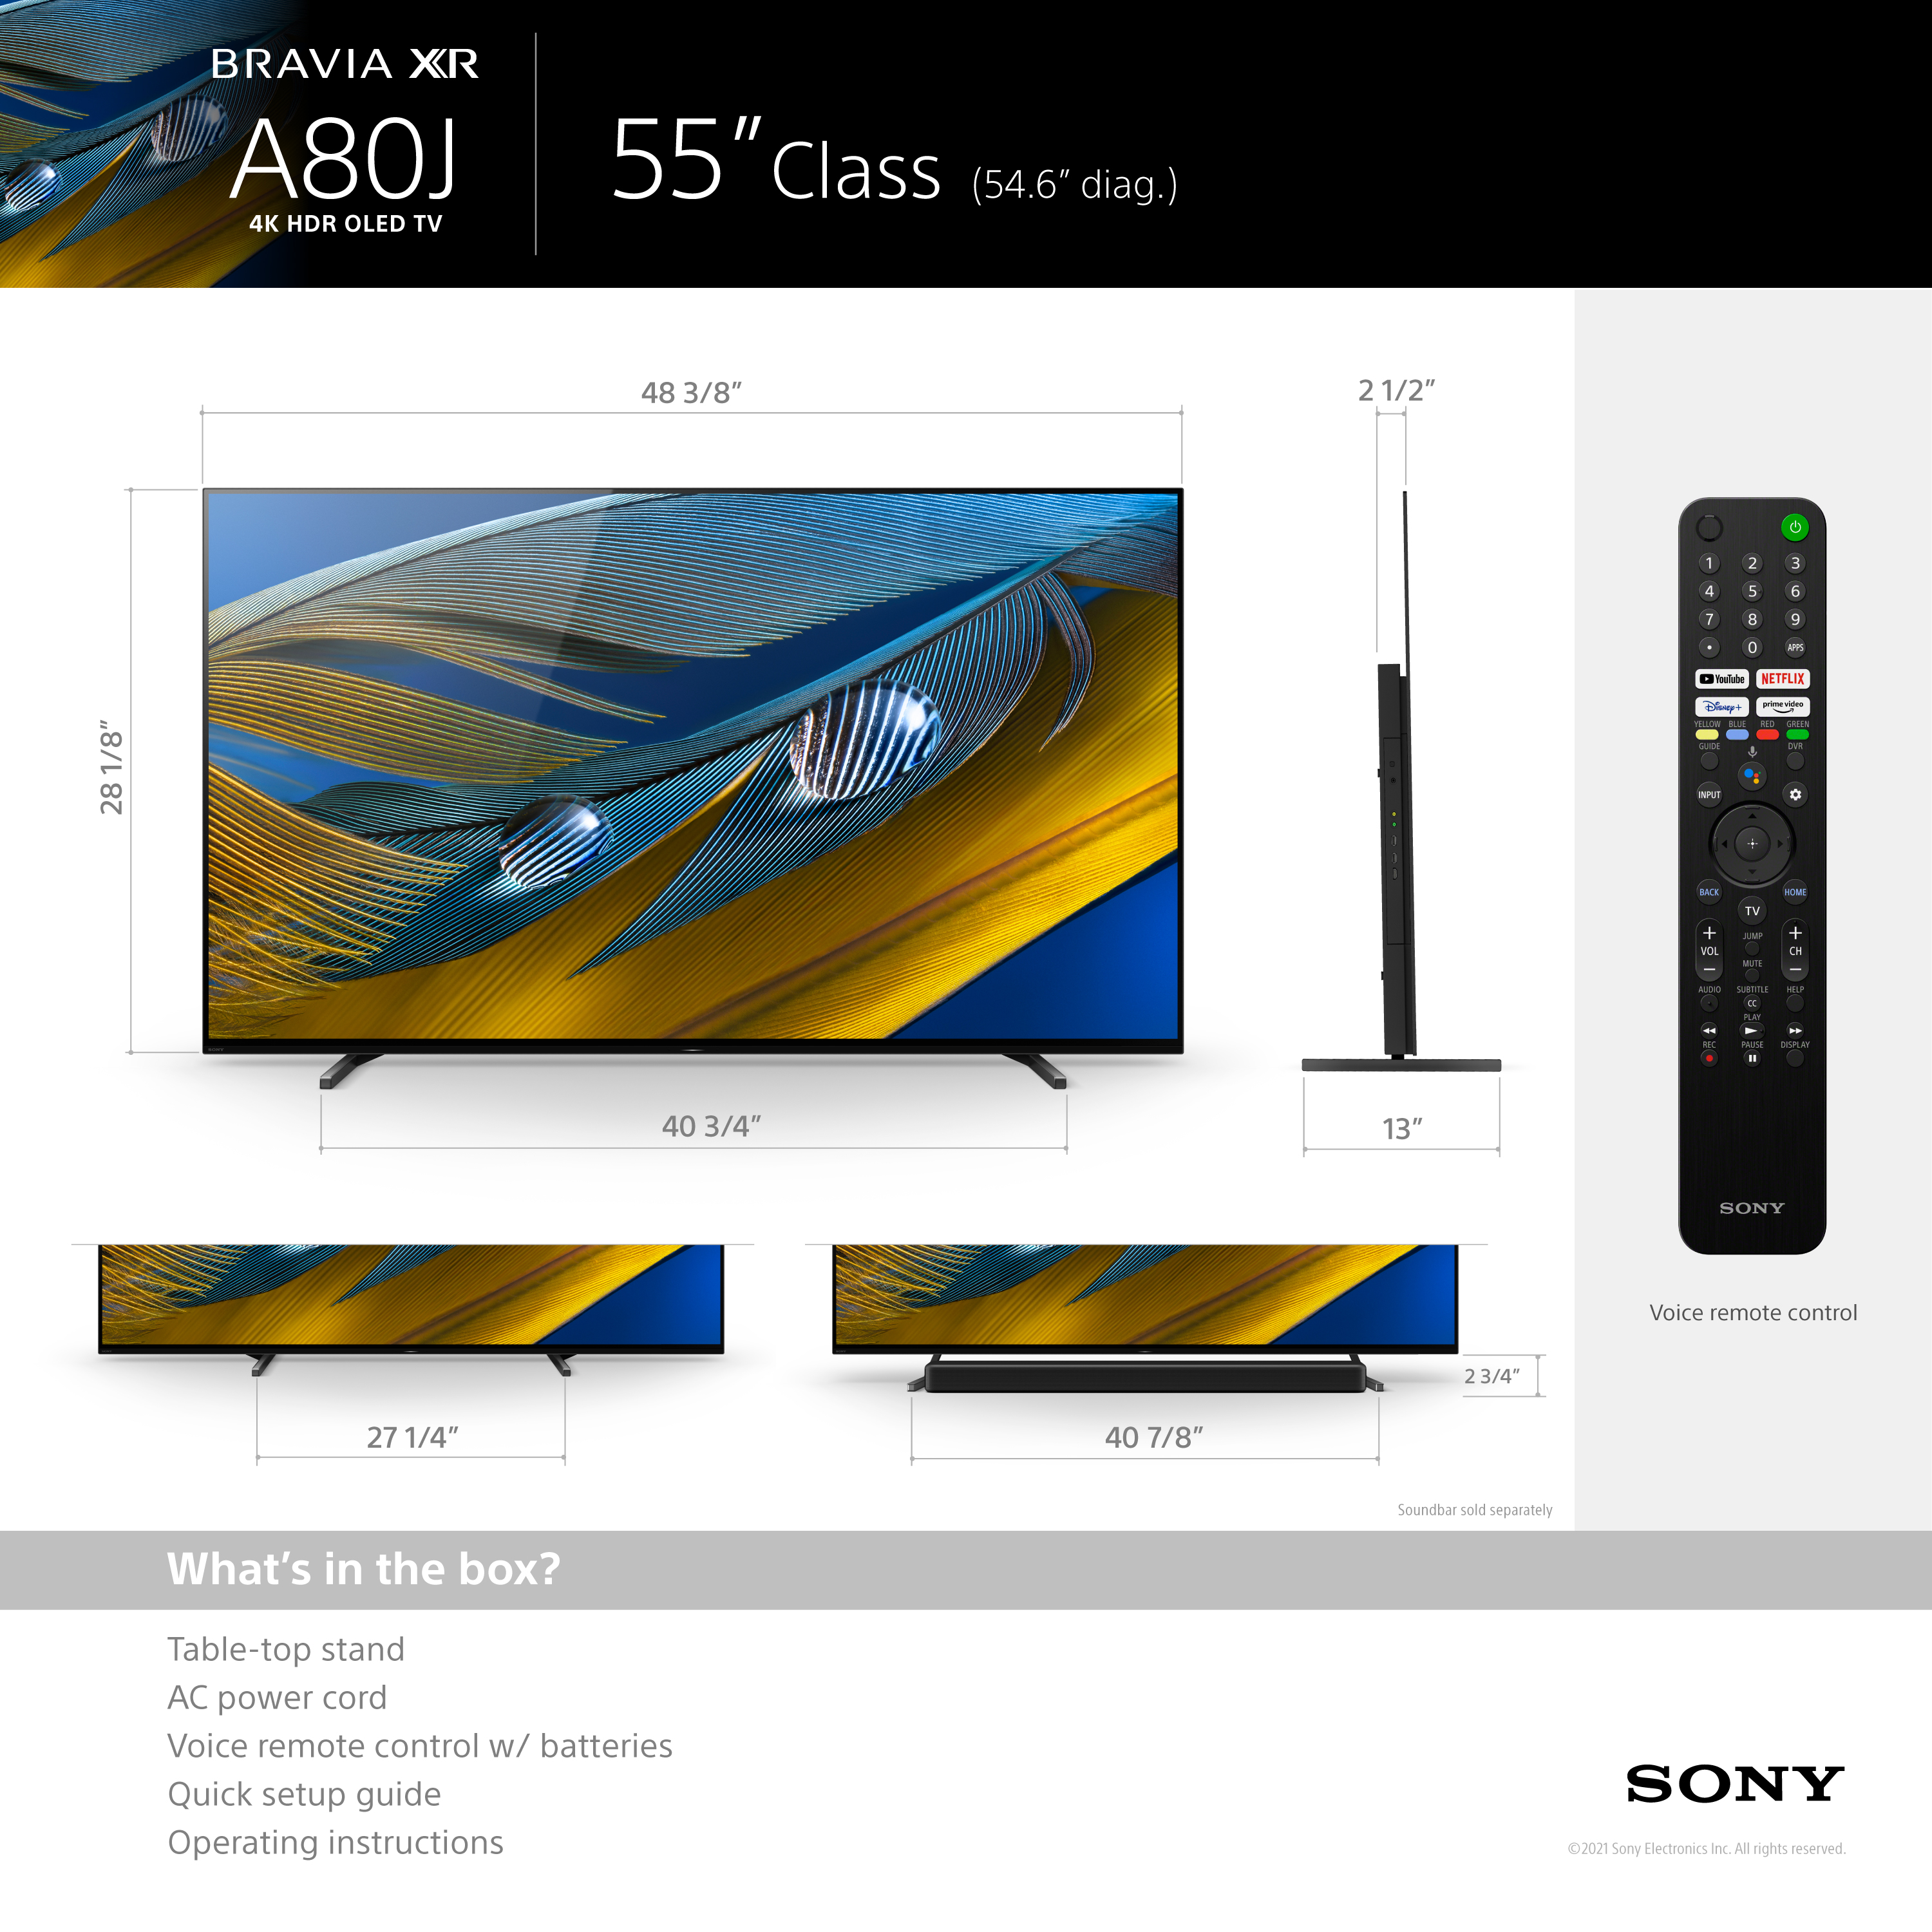 Sony 55” Class XR55A80J BRAVIA XR OLED 4K Ultra HD Smart Google TV with Dolby Vision HDR A80J Series- 2021 Model - image 8 of 22